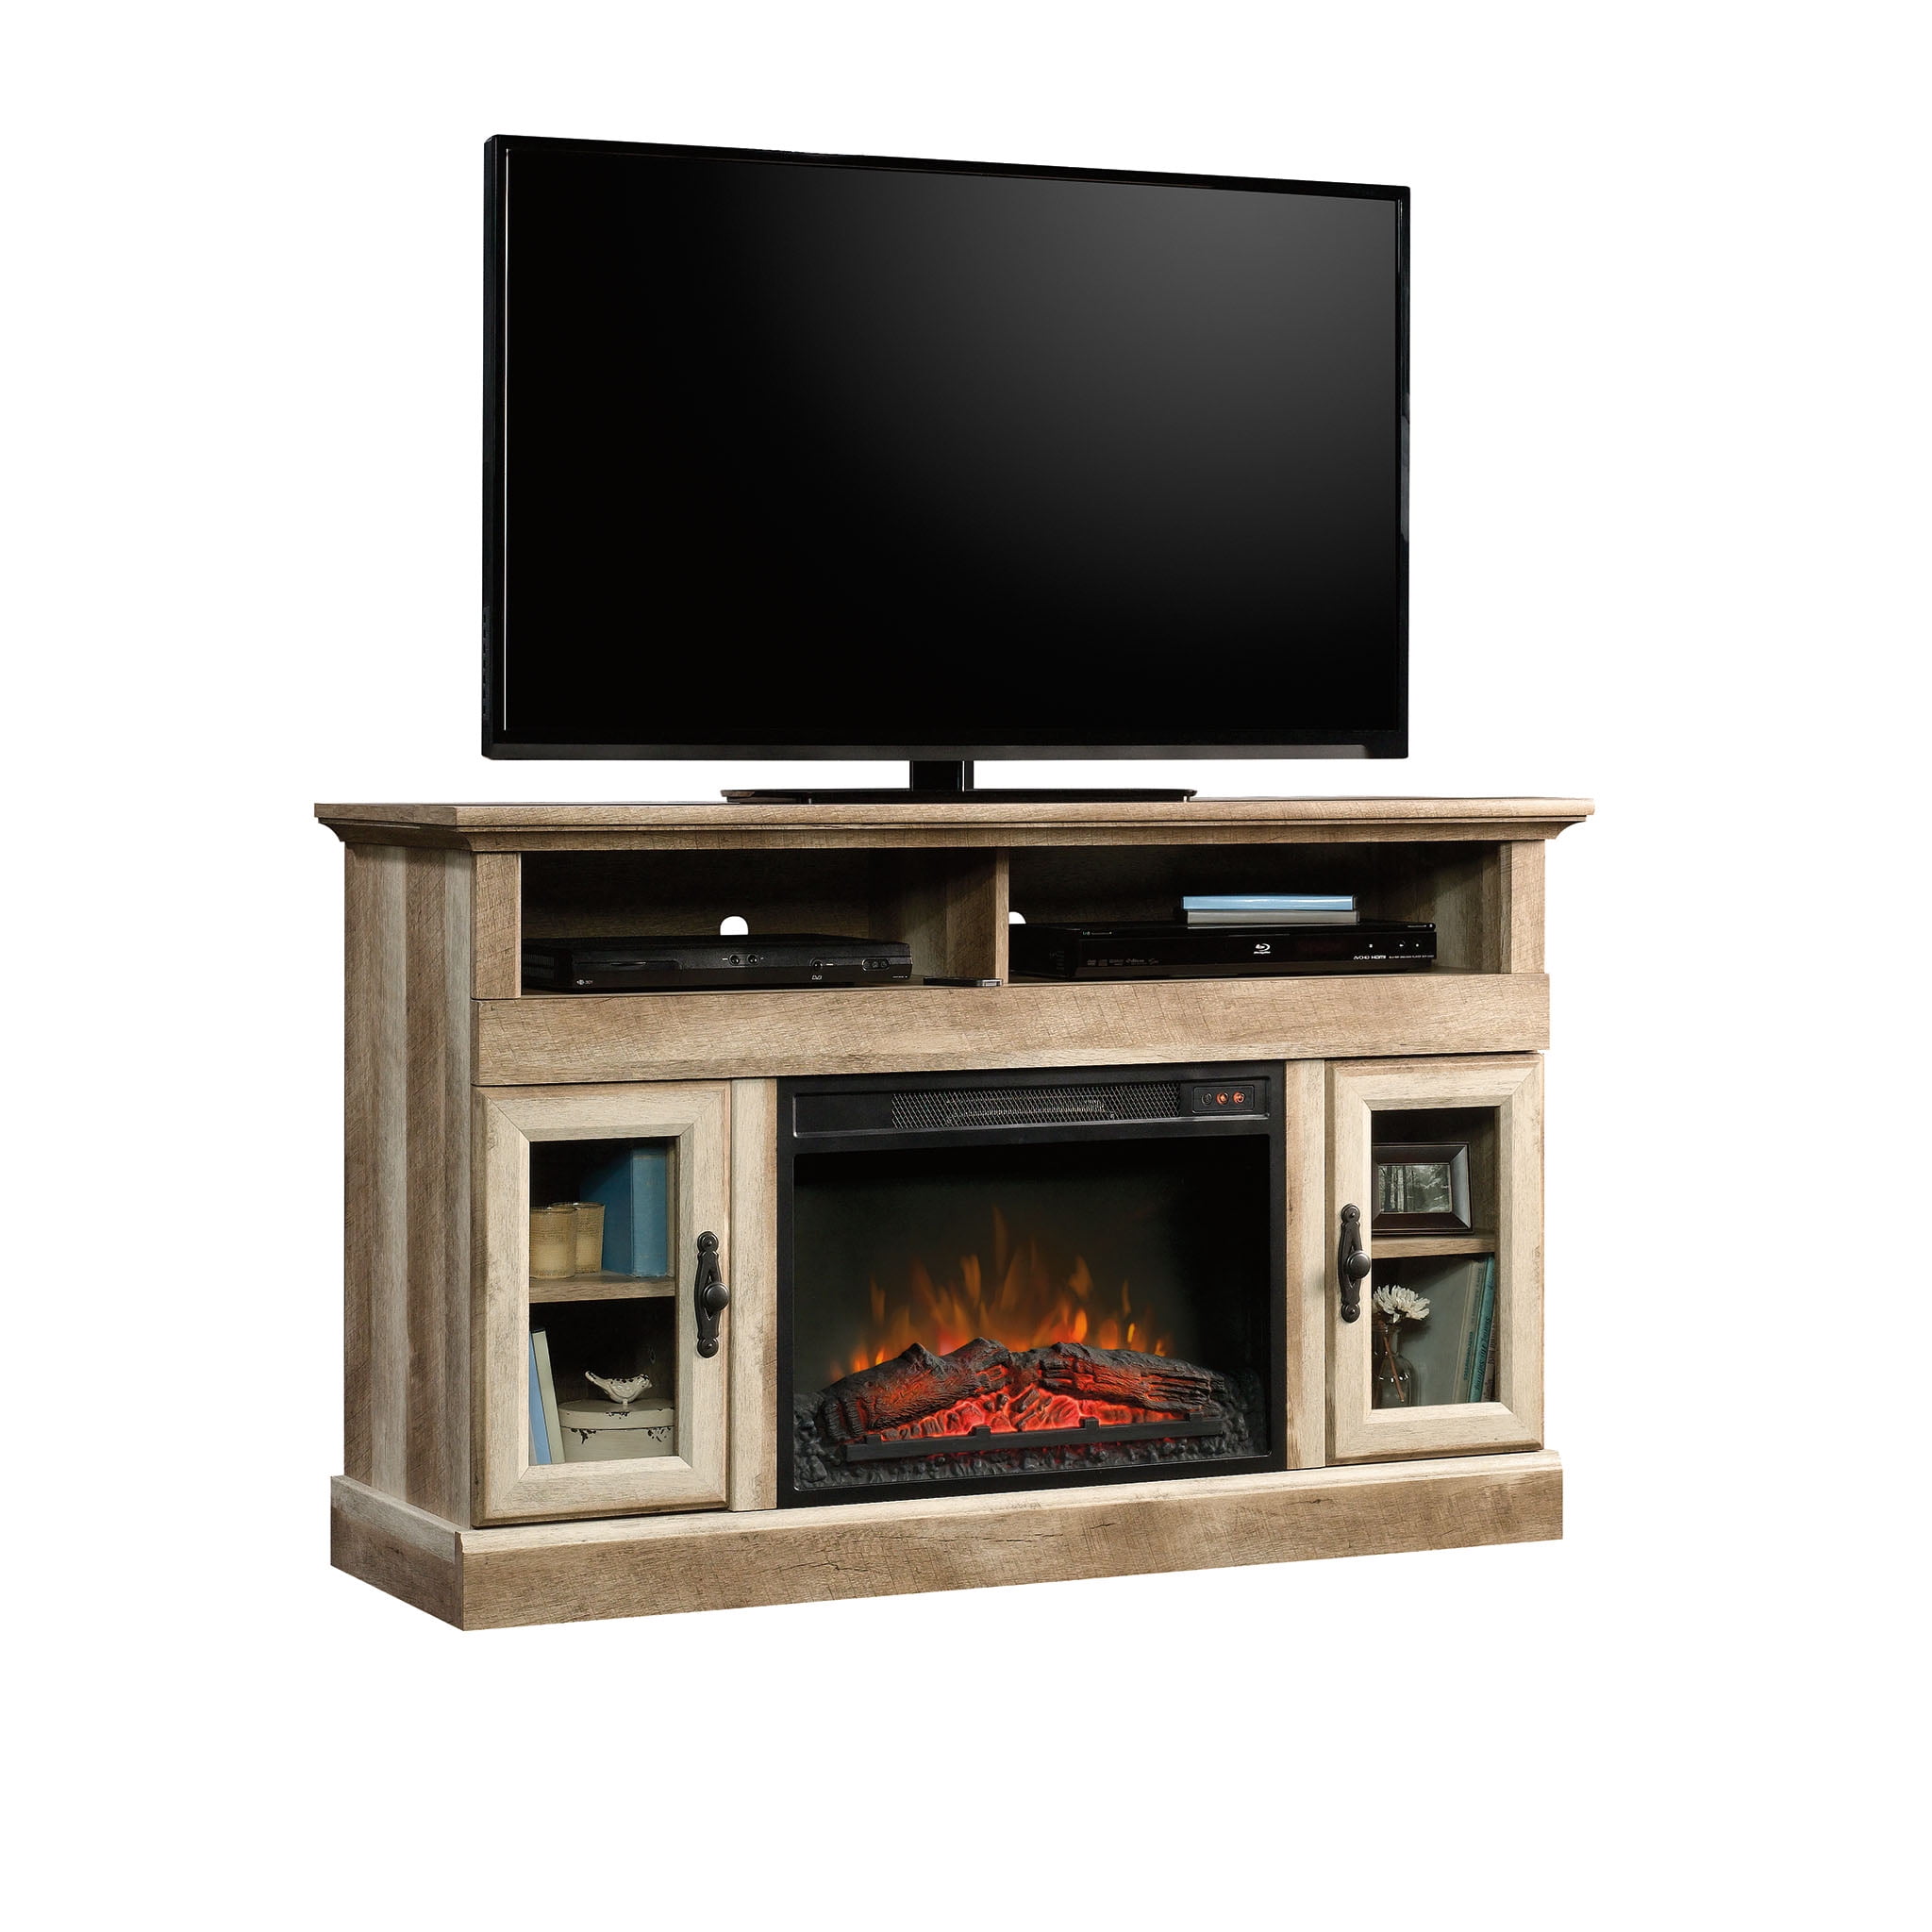 Weathered Finish Better Homes and Gardens Crossmill Fireplace Media Console 